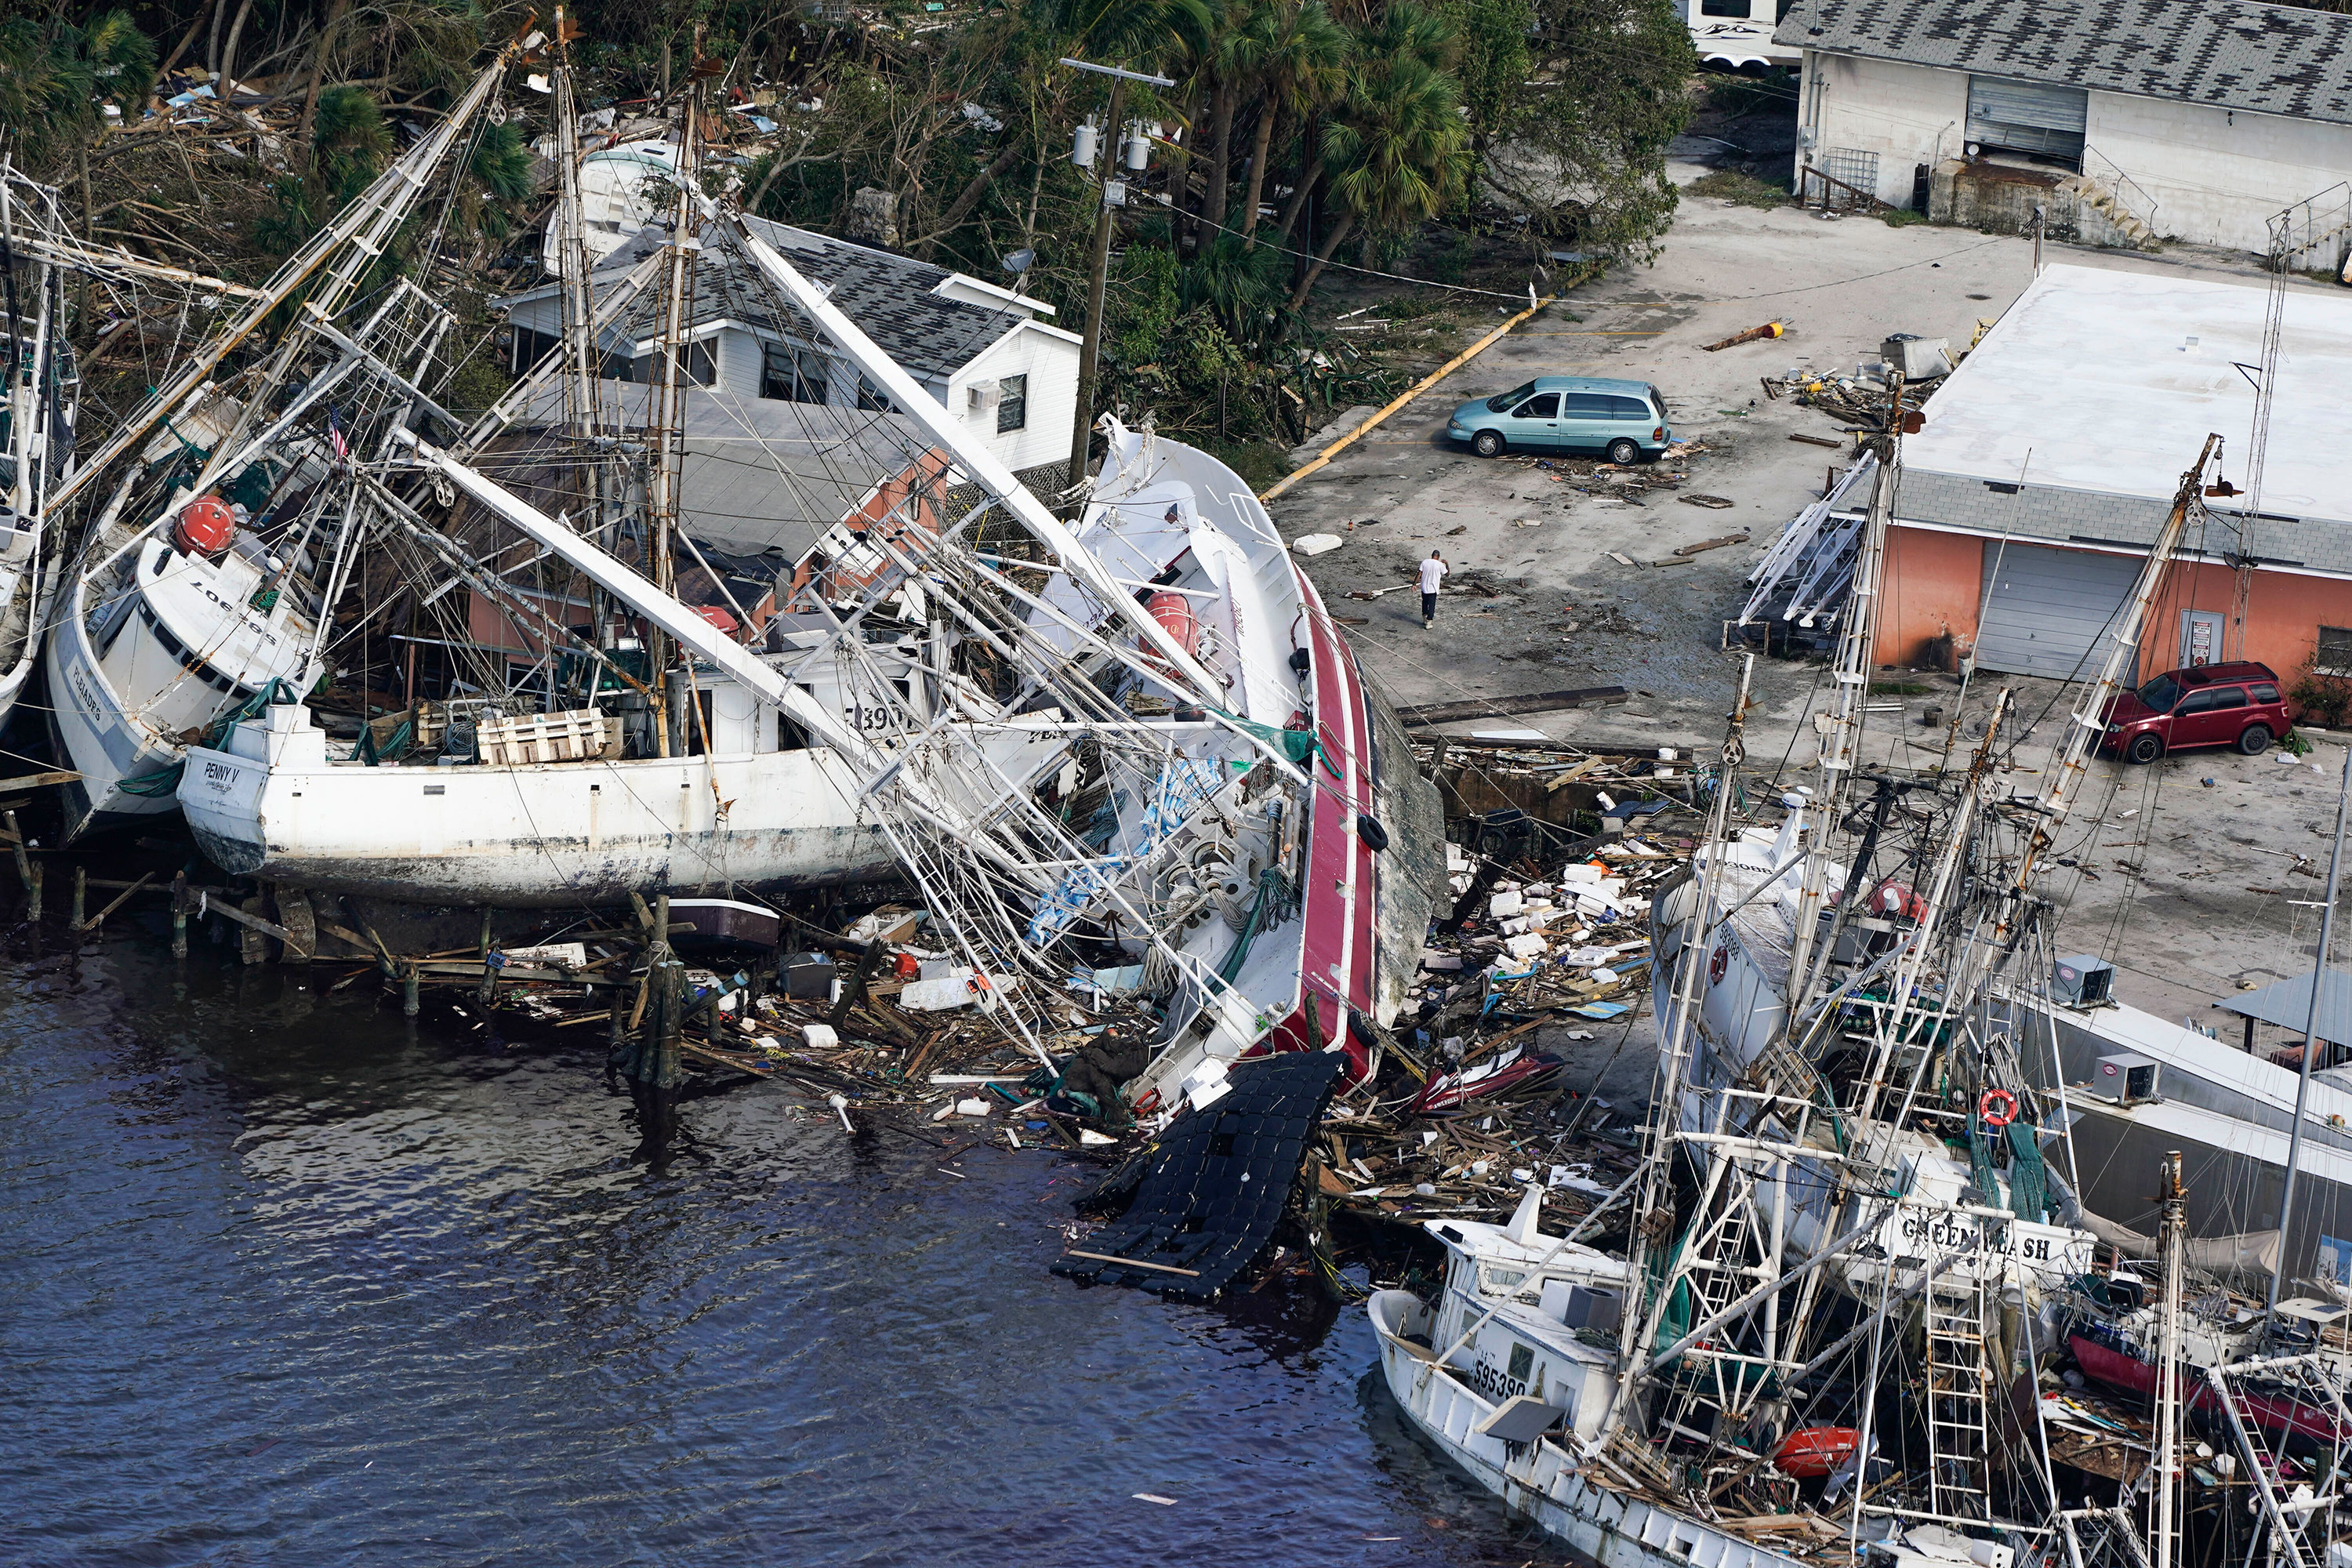 Damaged boats and debris rest against the shore in Fort Myers.